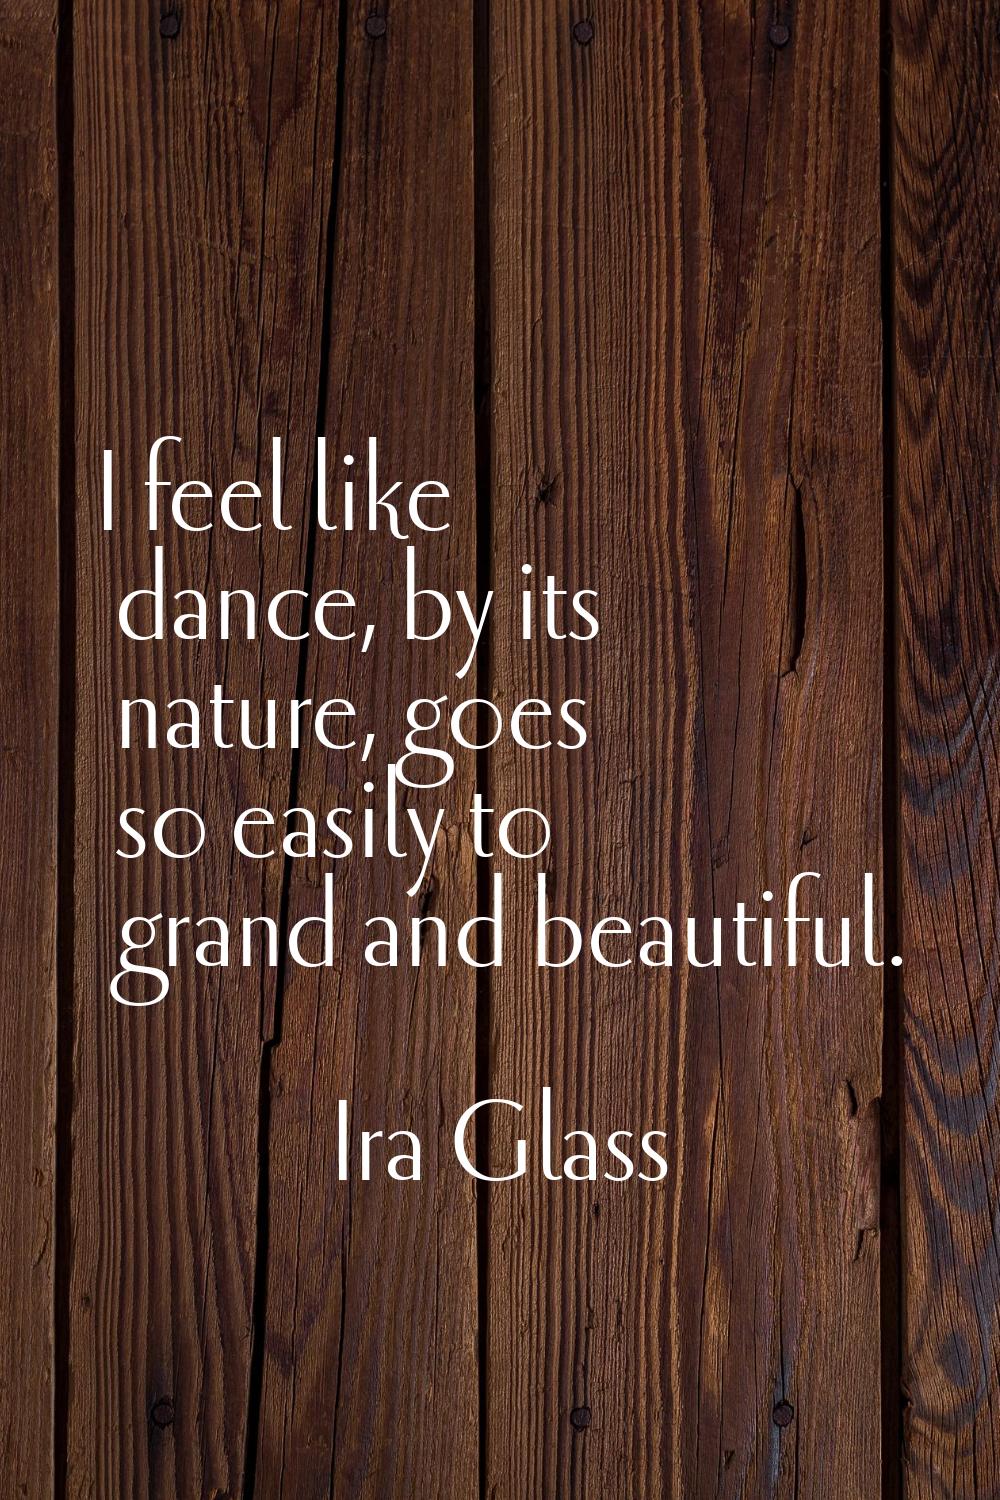 I feel like dance, by its nature, goes so easily to grand and beautiful.